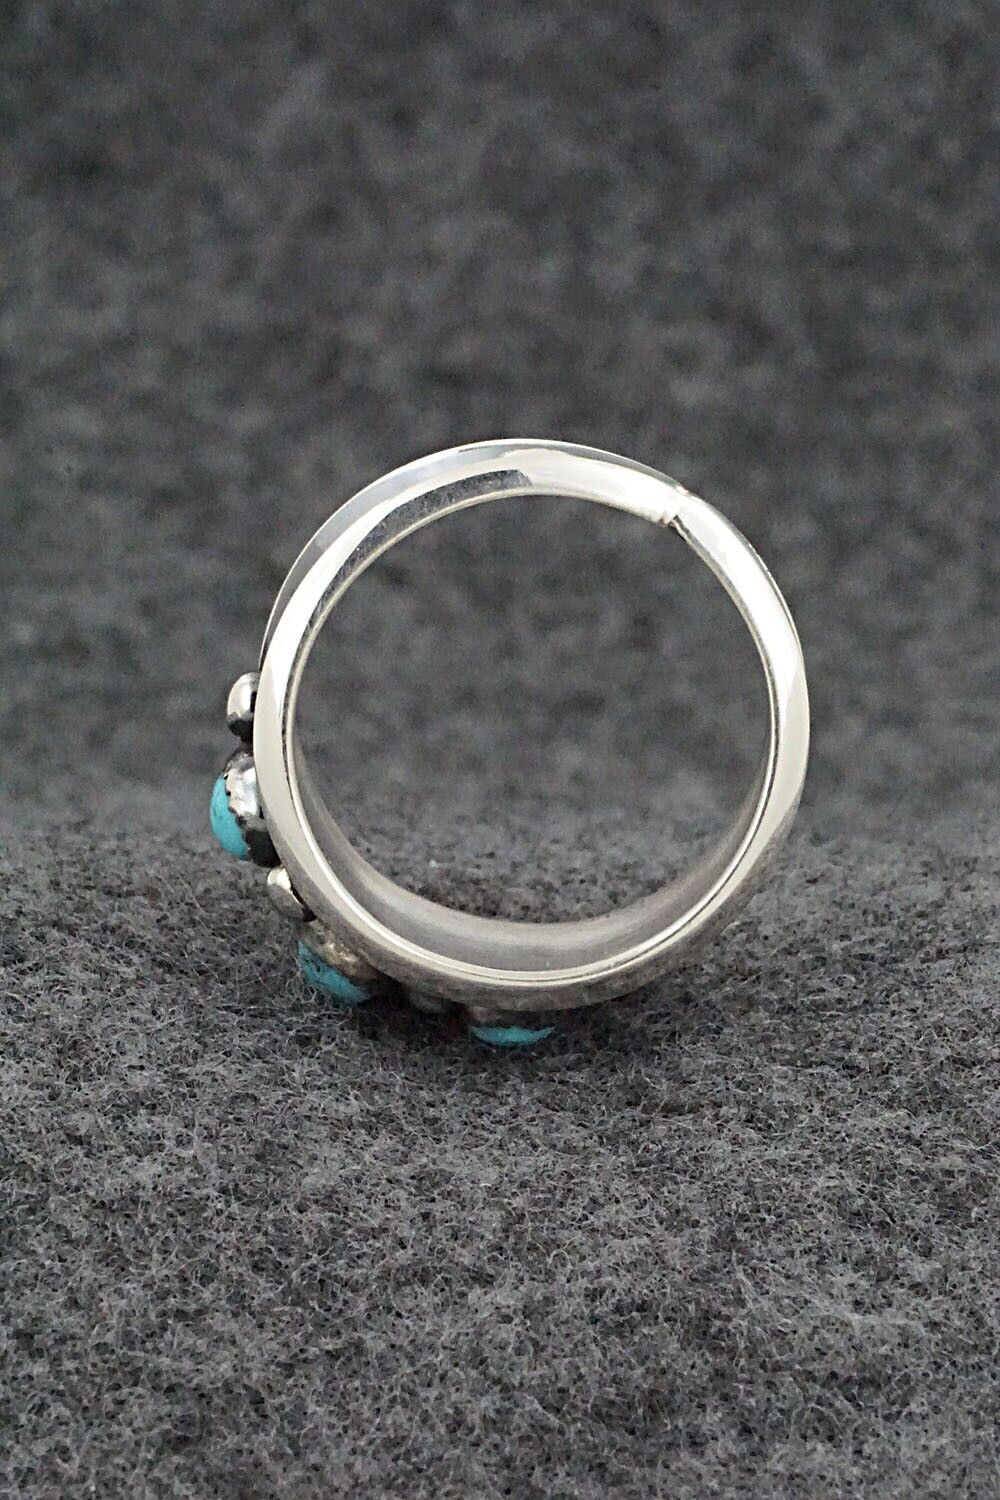 Turquoise & Sterling Silver Ring - Paul Largo - Size 11.5